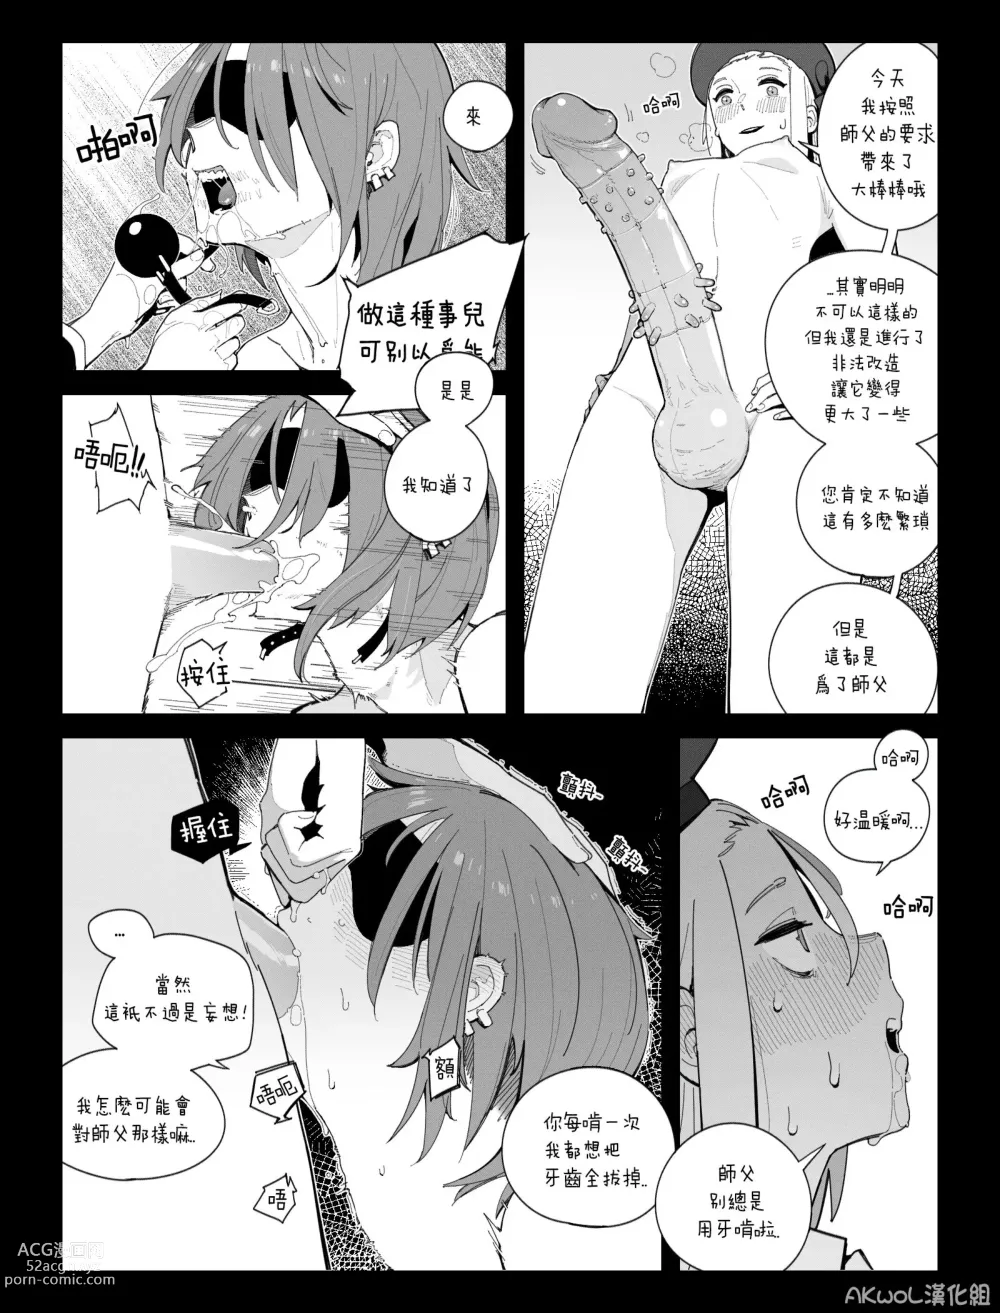 Page 5 of doujinshi Thompson NSFW (decensored)